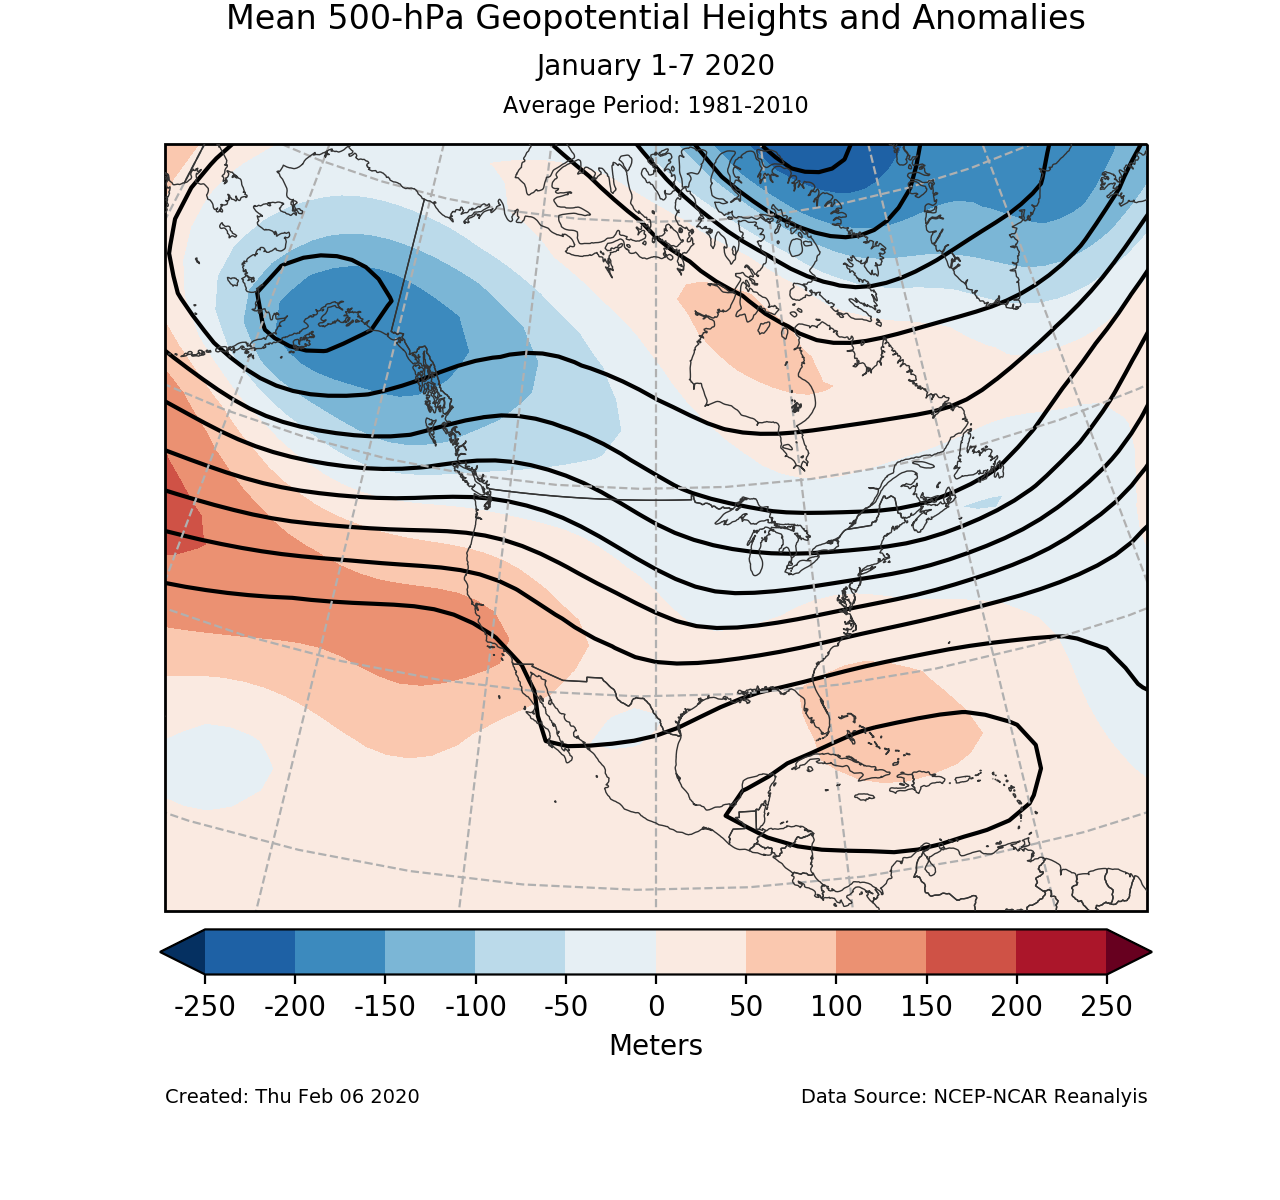 500-mb circulation anomalies for North America for January 1-7 2020